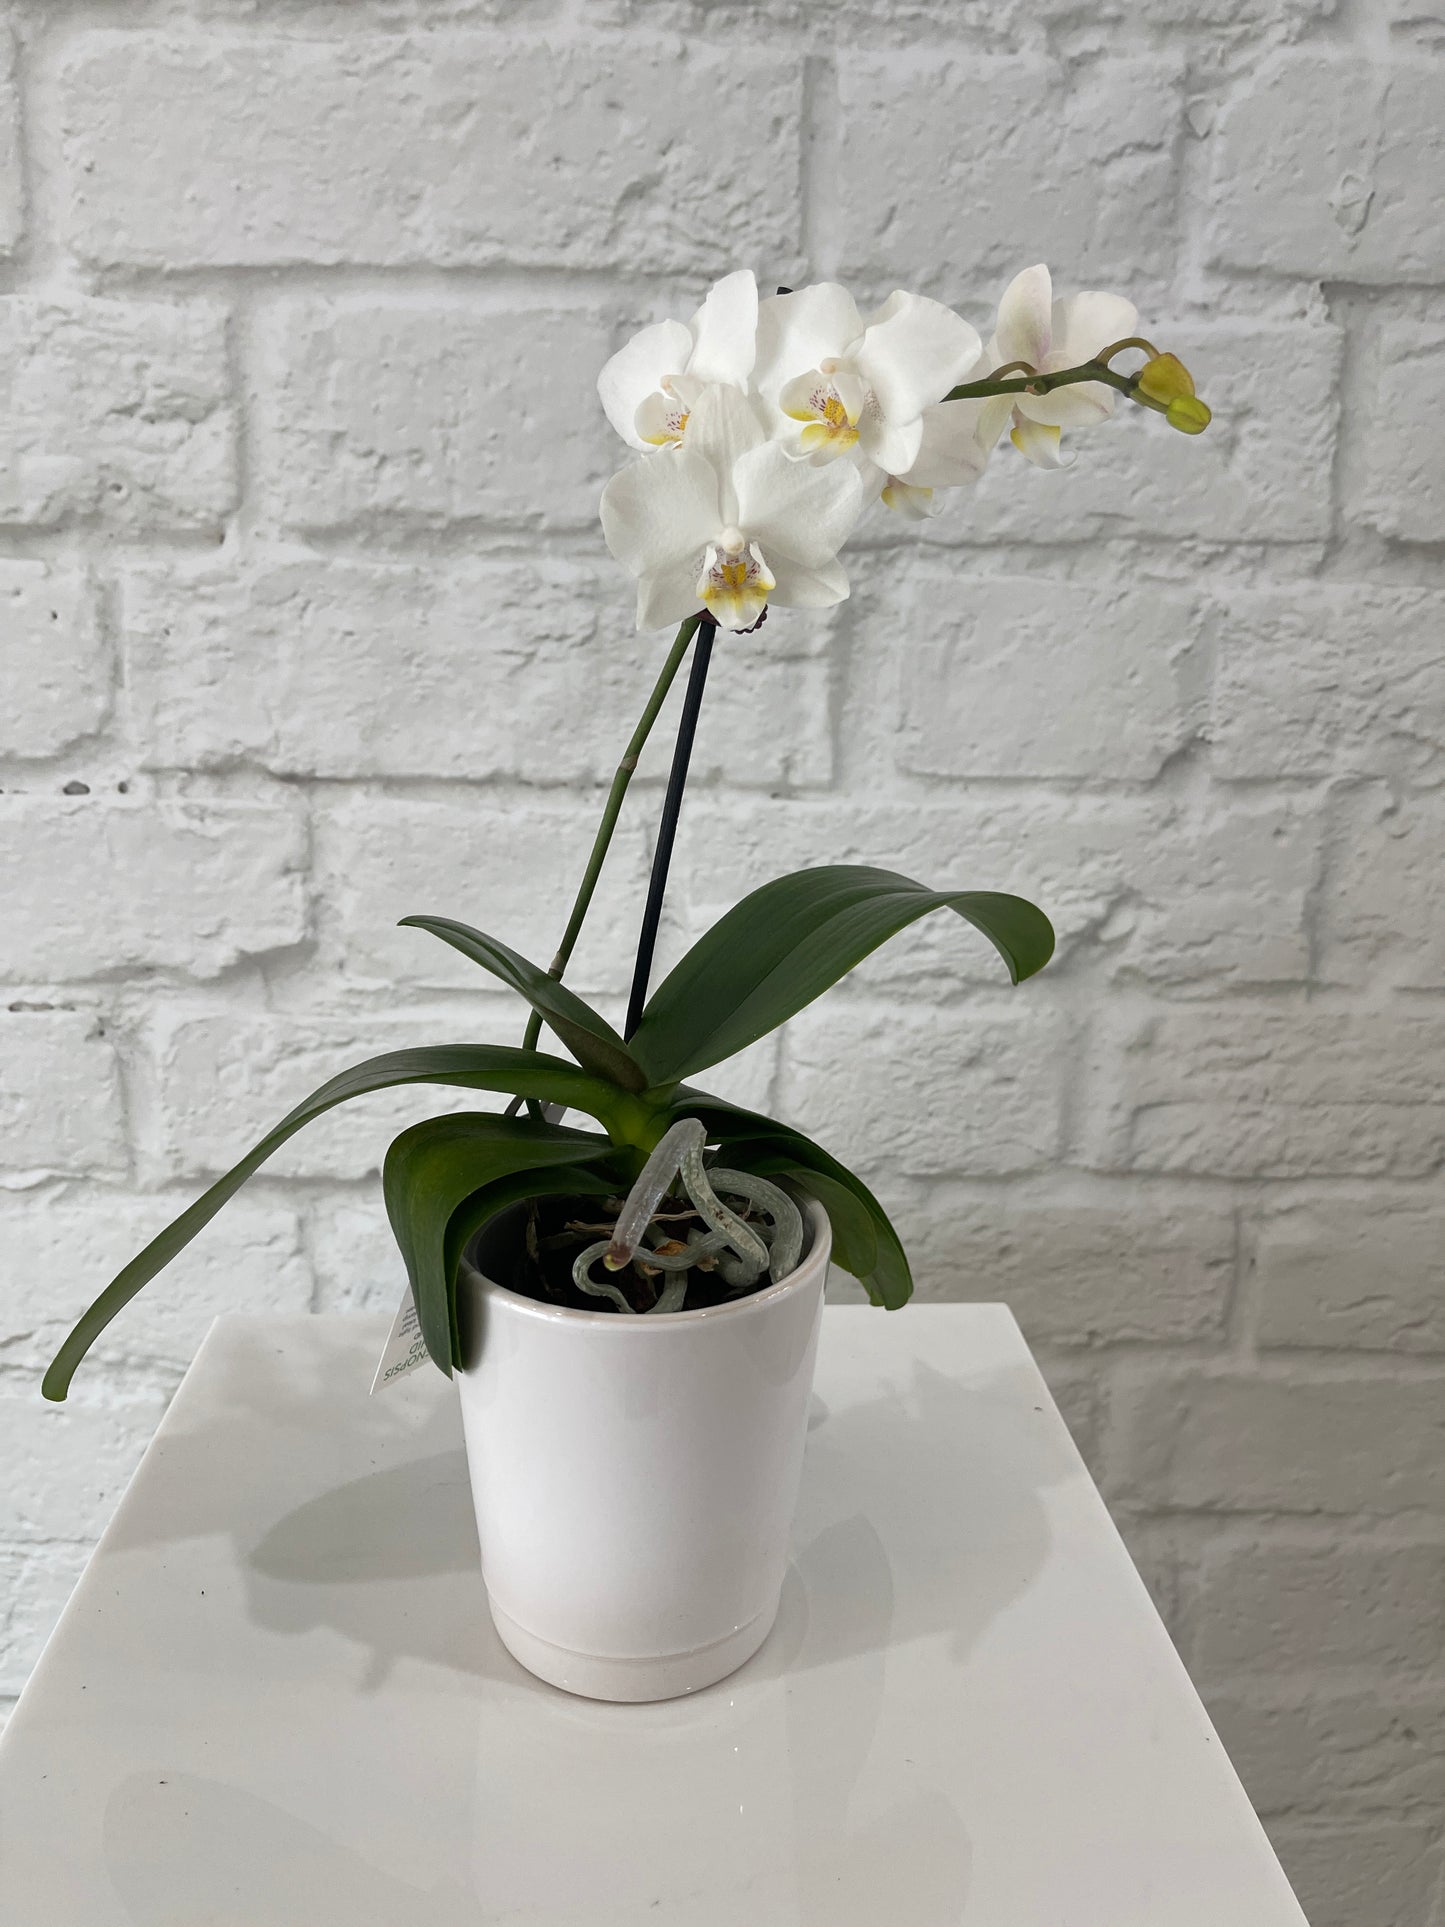 Mini Orchid - Reduced to clear